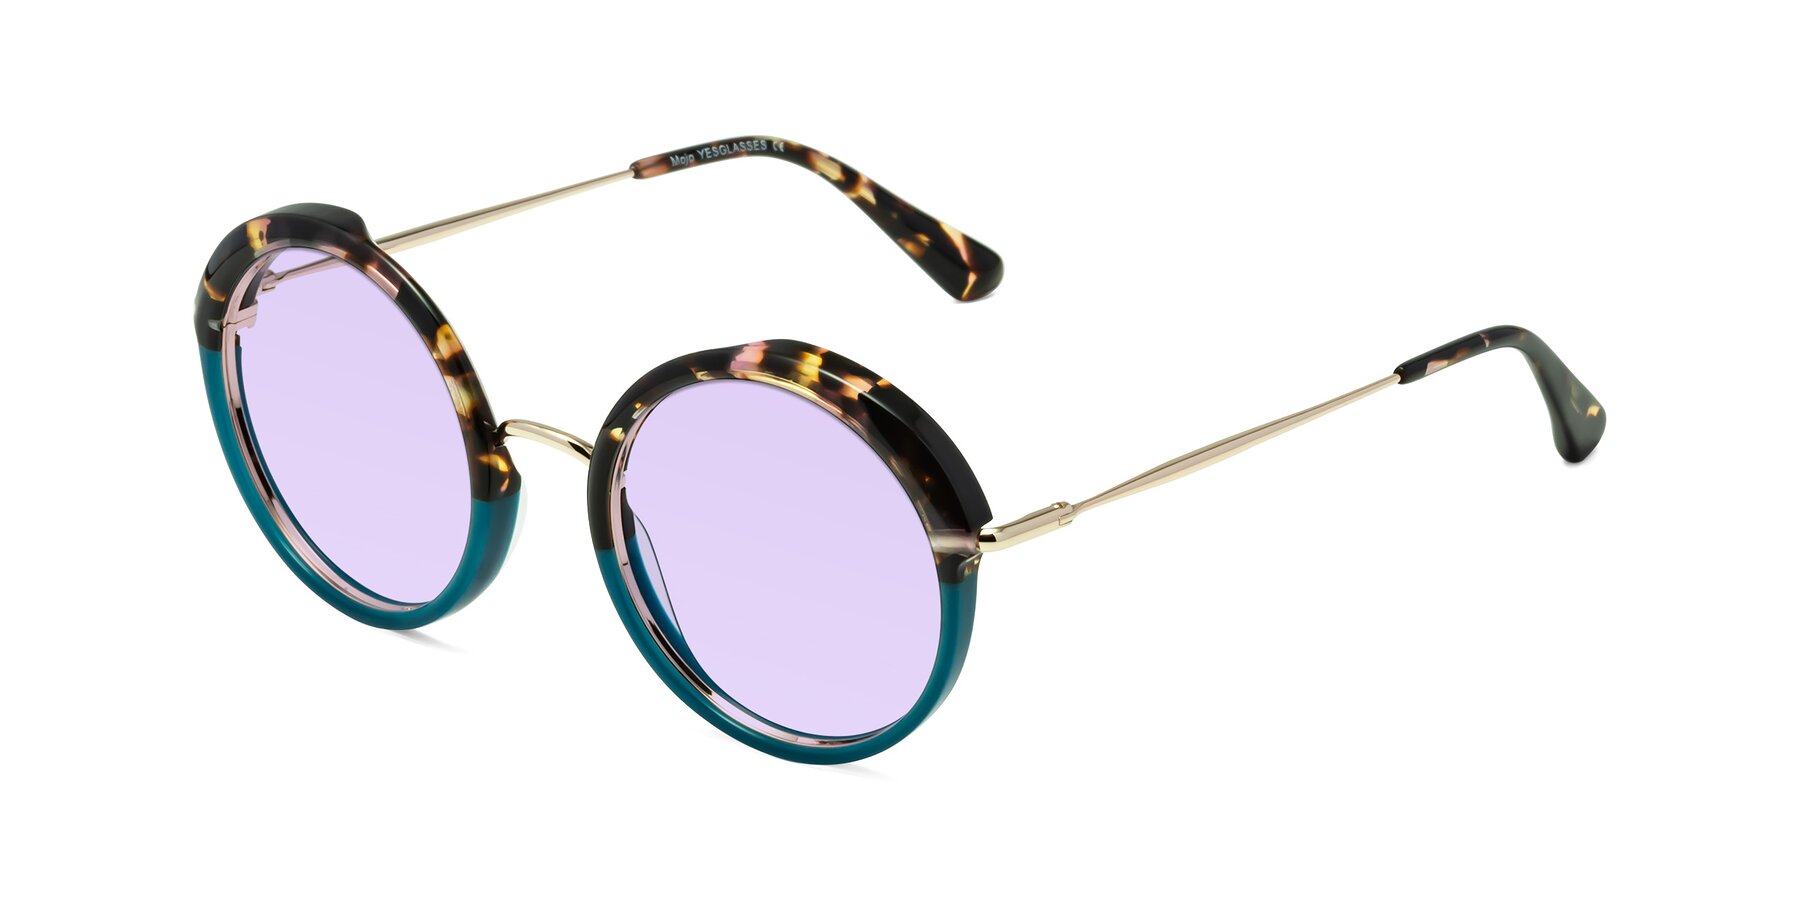 Angle of Mojo in Floral-Teal with Light Purple Tinted Lenses